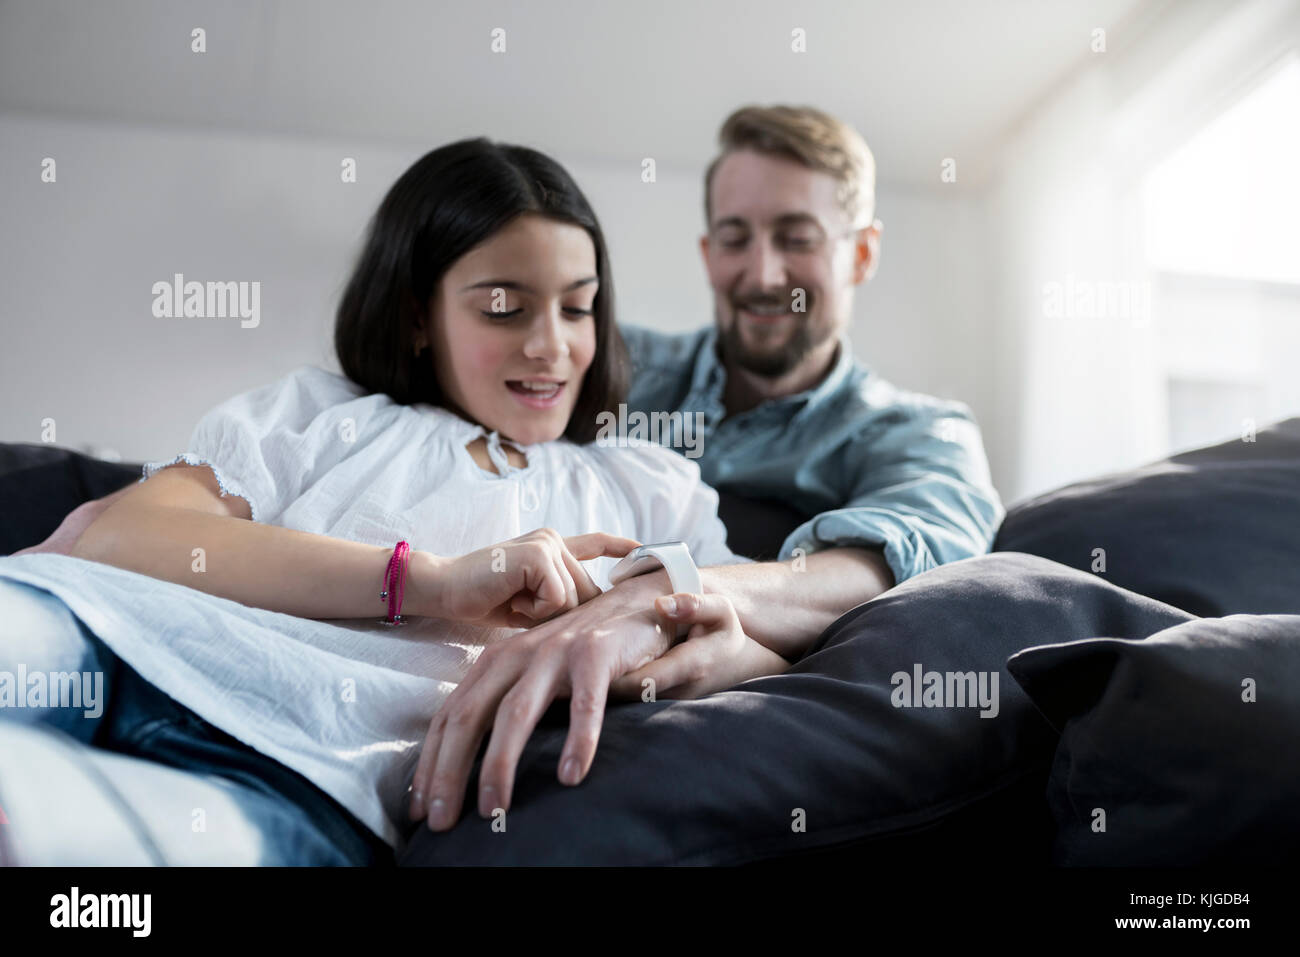 Daughter looking at her father's smartwatch Stock Photo